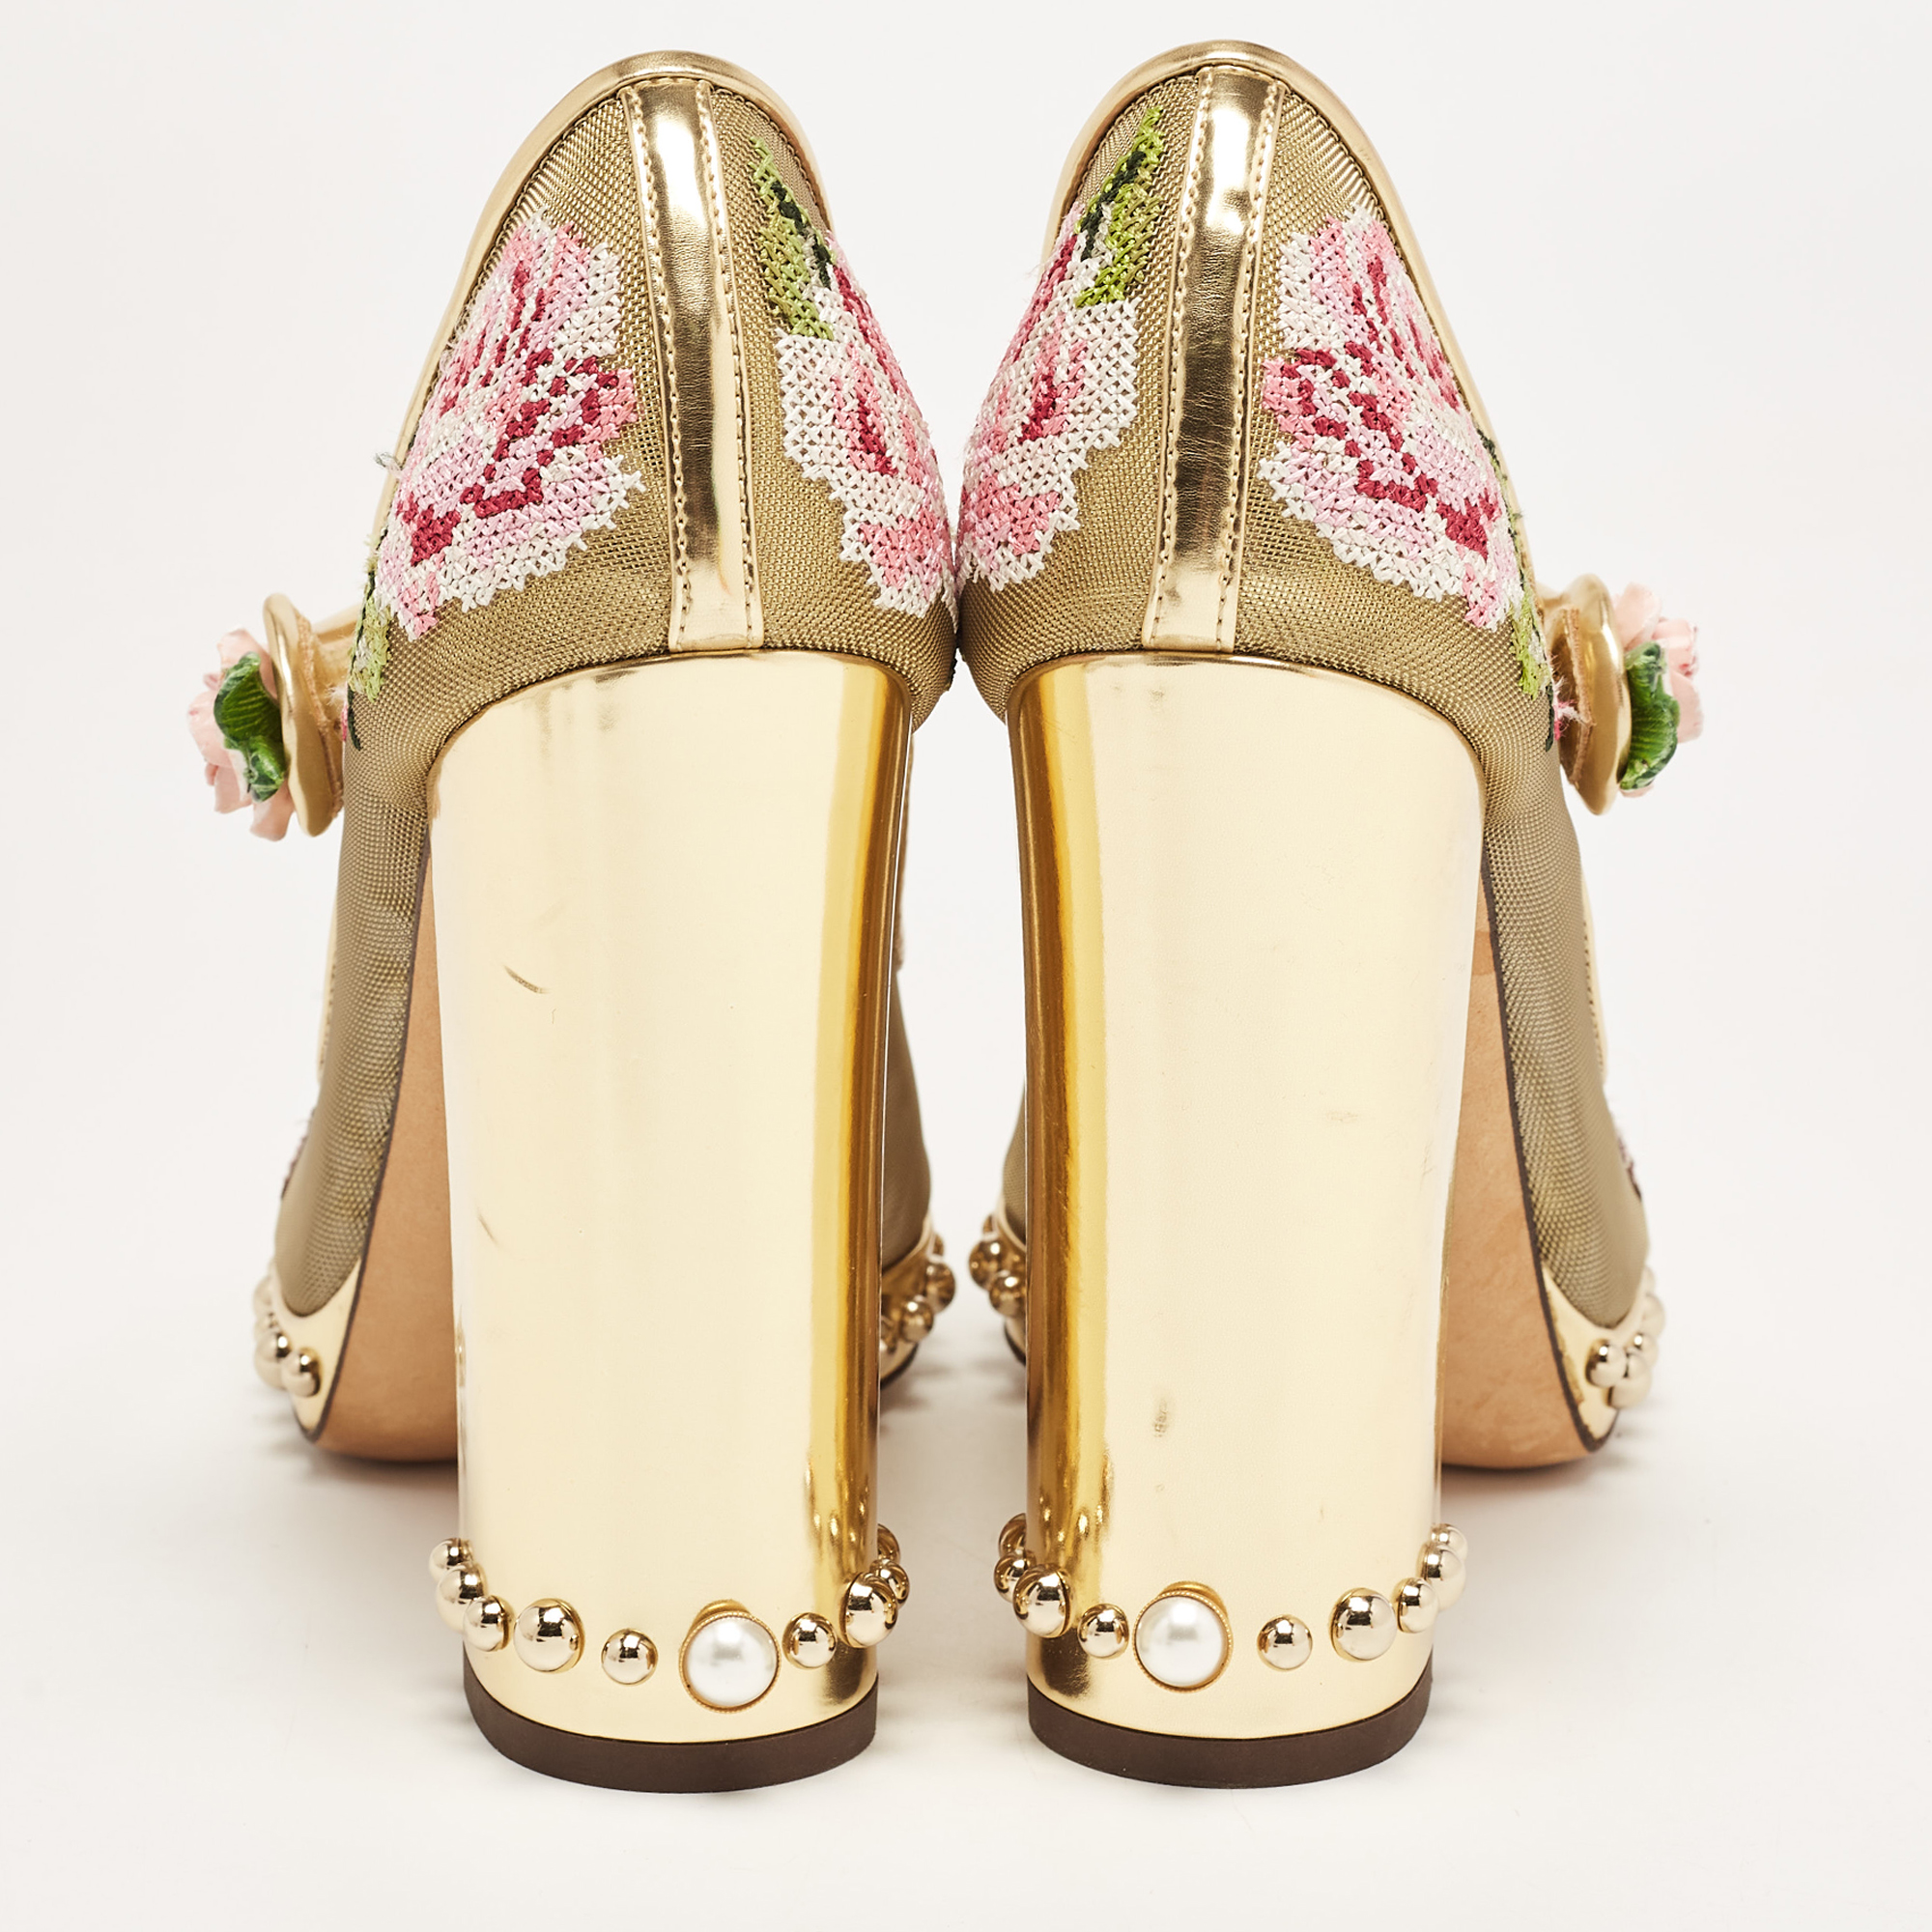 Dolce & Gabbana Gold Mesh And Leather Floral Print Studded Accents Mary Jane Block Heel Pumps Size 40